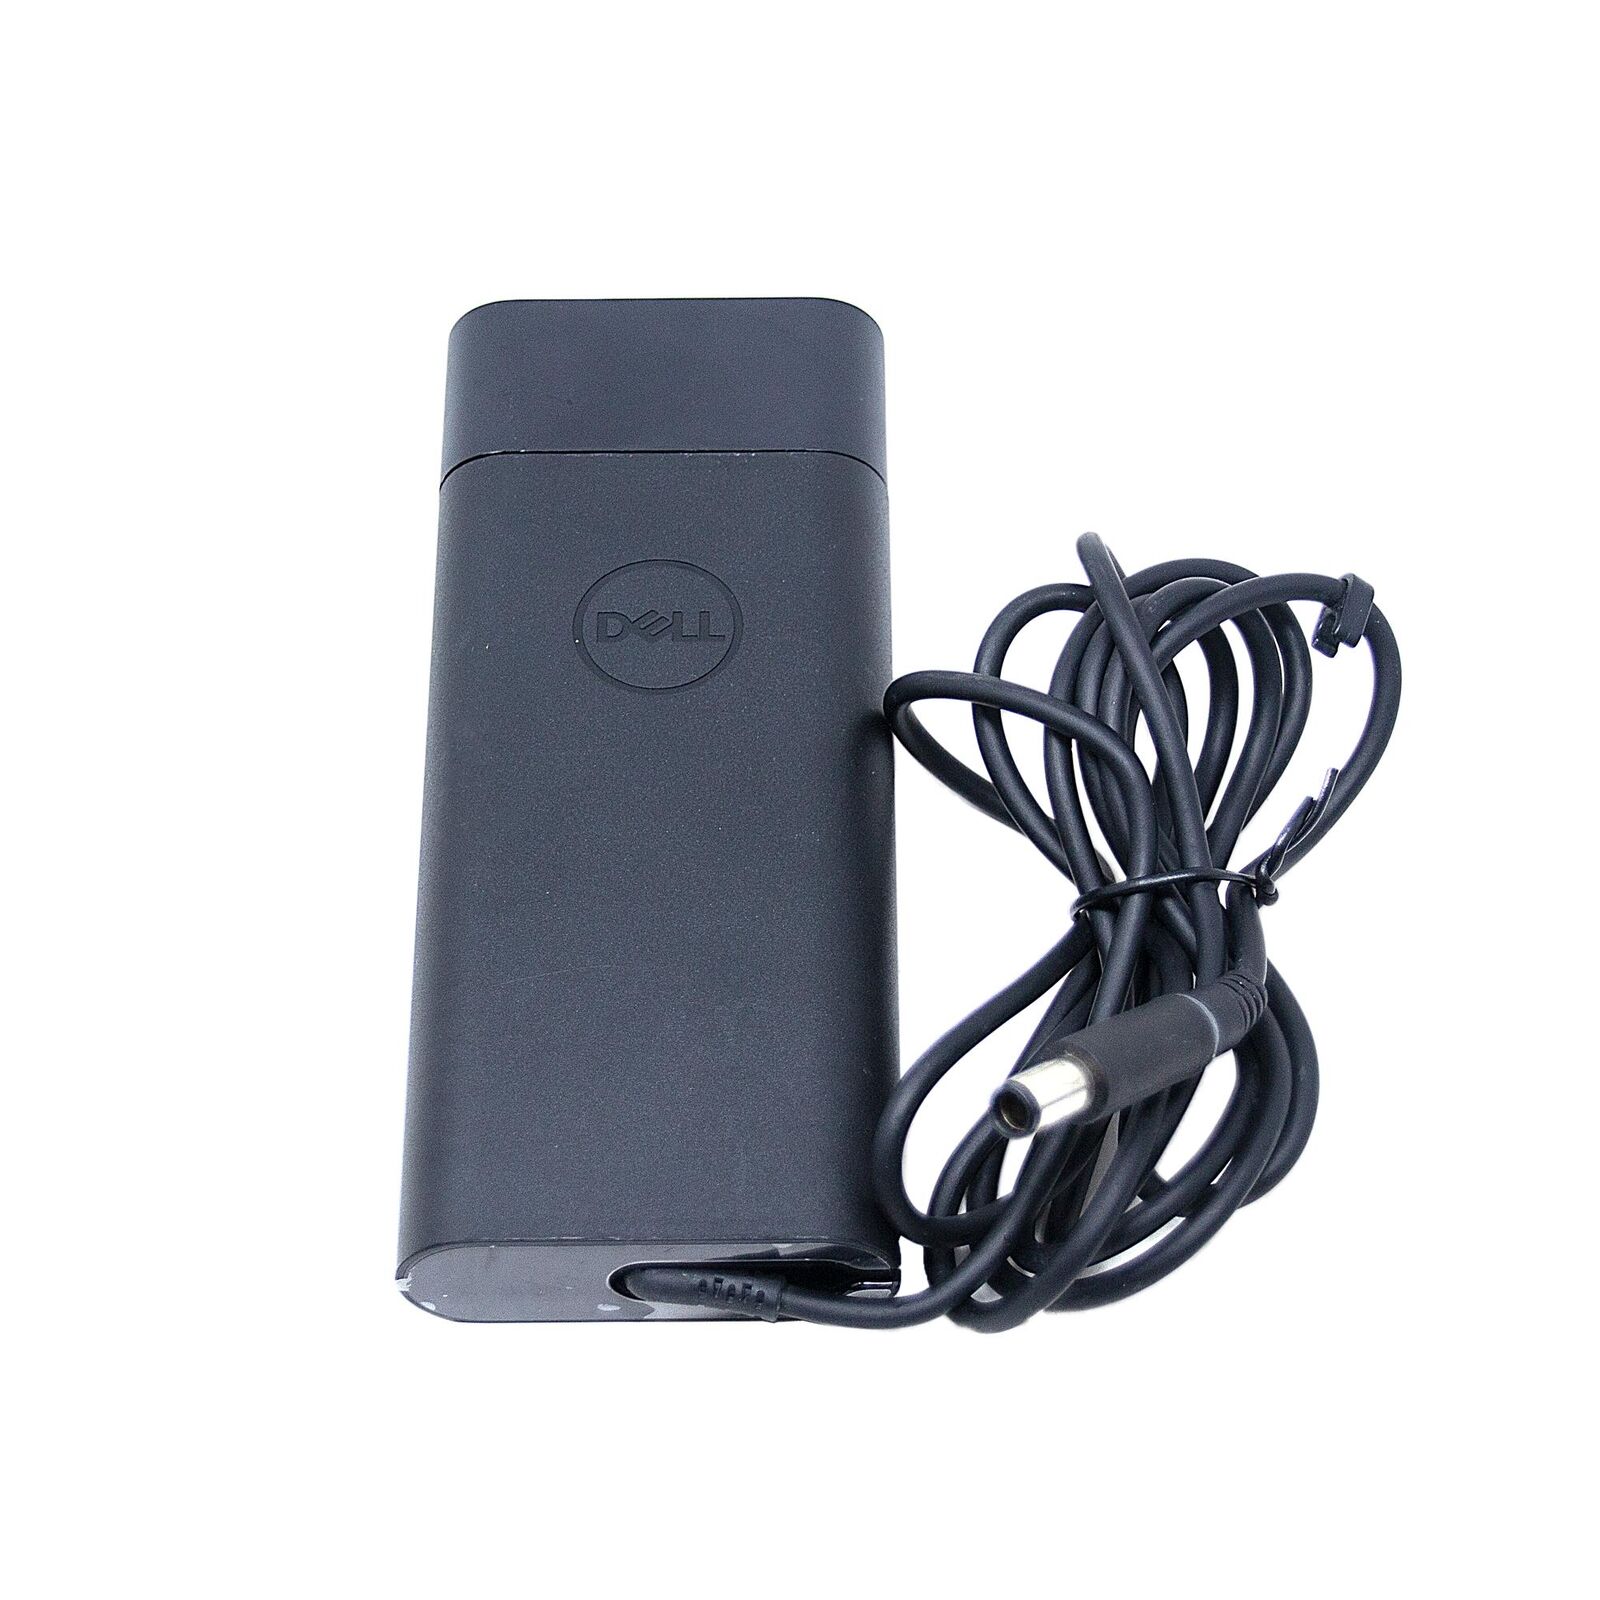 DELL 29W3X 19.5V 4.62A 90W Genuine Original AC Power Adapter Charger